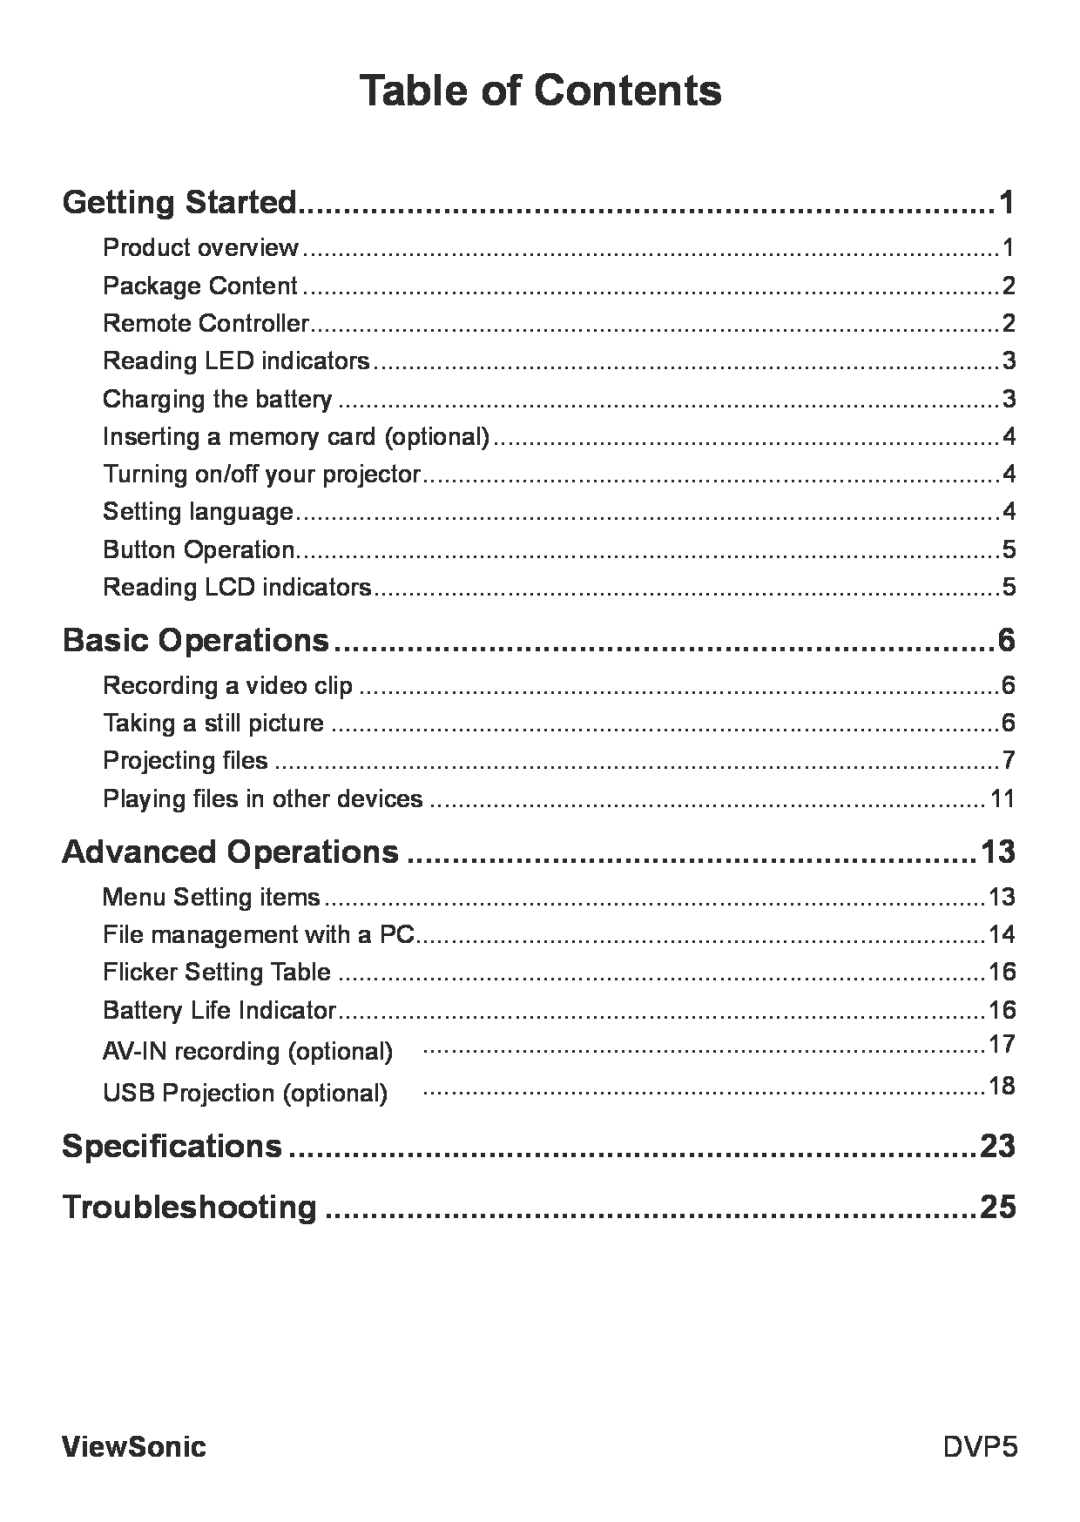 ViewSonic VS13783 warranty Table of Contents, Getting Started, Basic Operations, Advanced Operations, Specifications, DVP5 